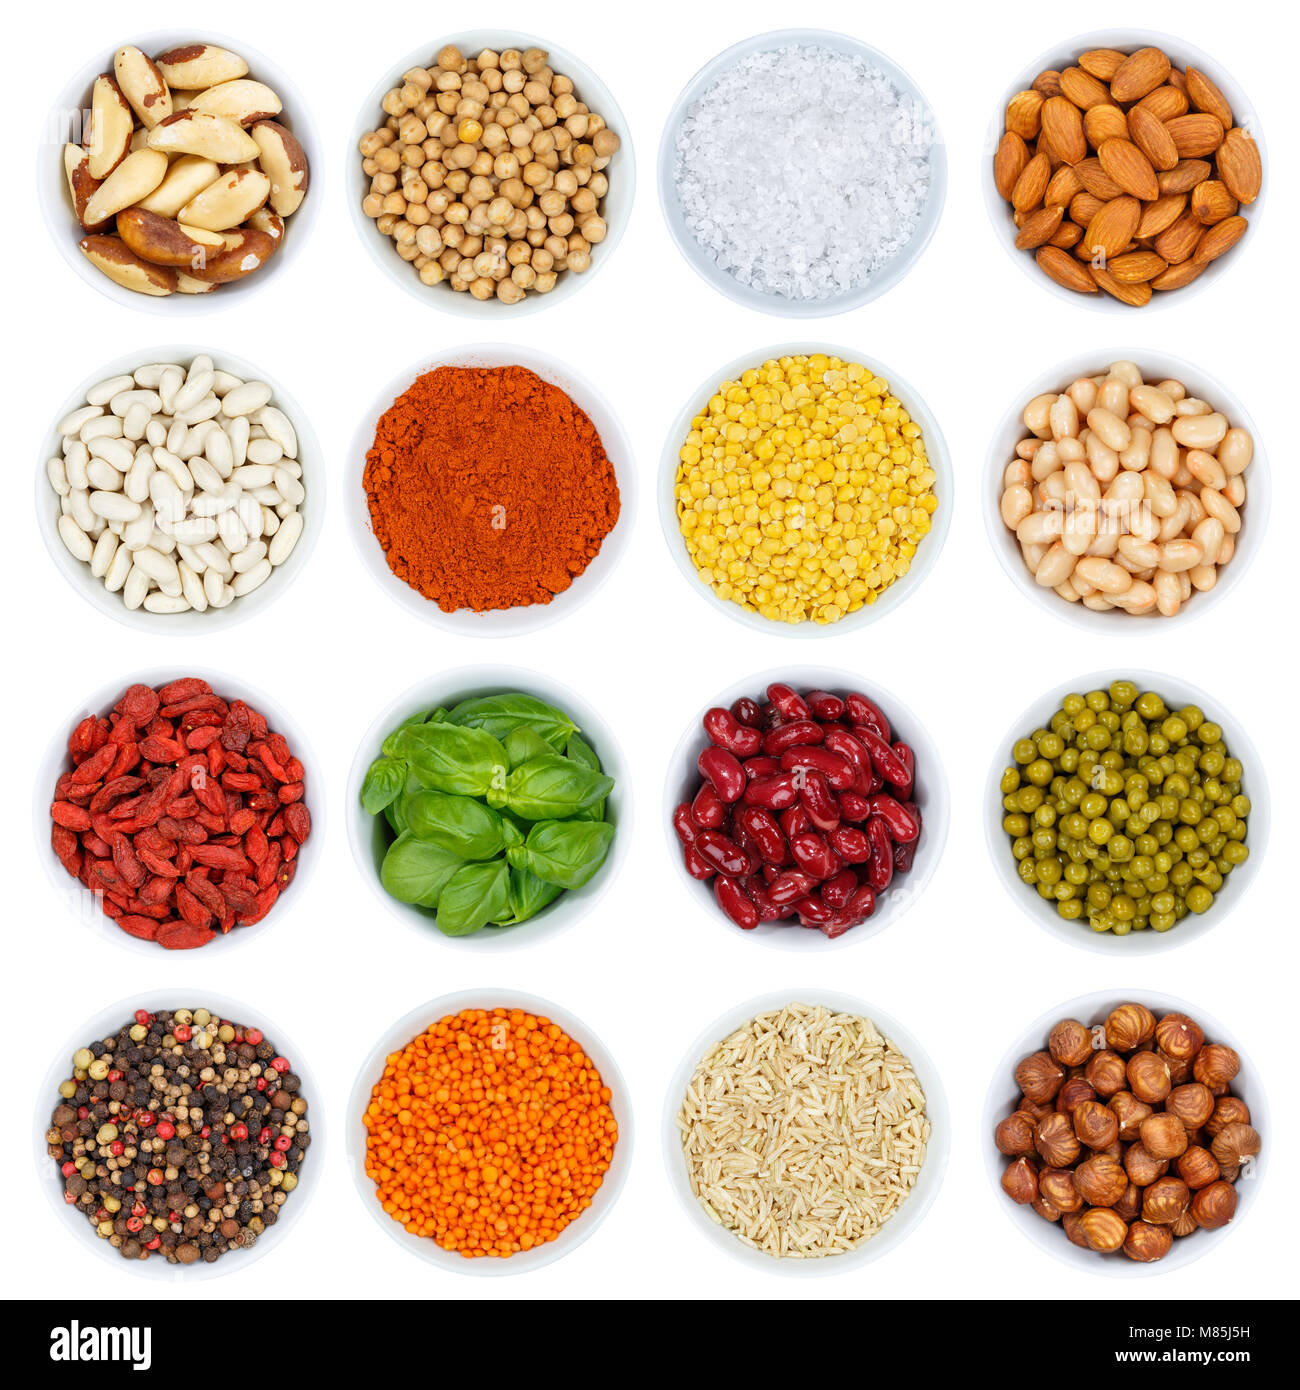 Collection of spices and herbs vegetables nuts from above bowl isolated on a white background Stock Photo